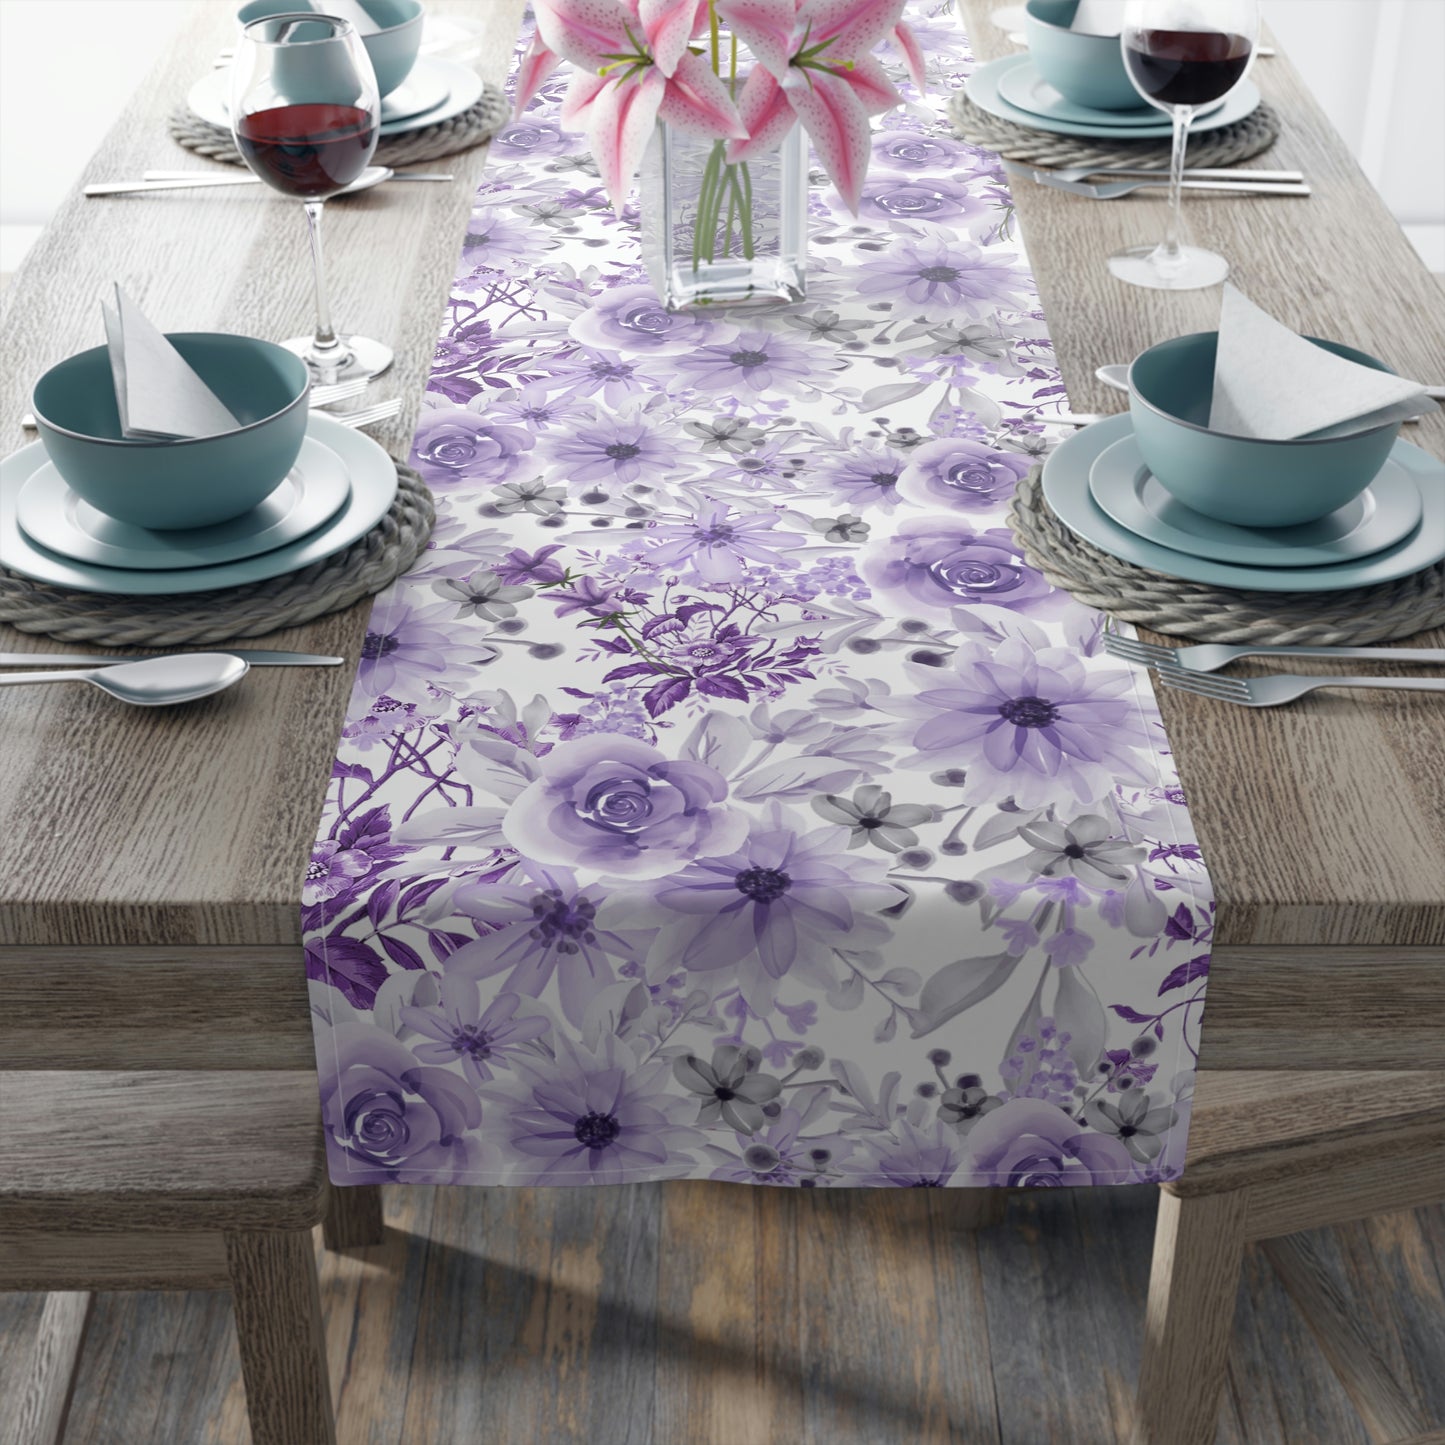 spring purple flower table runner with shades of lavender, purple and grey